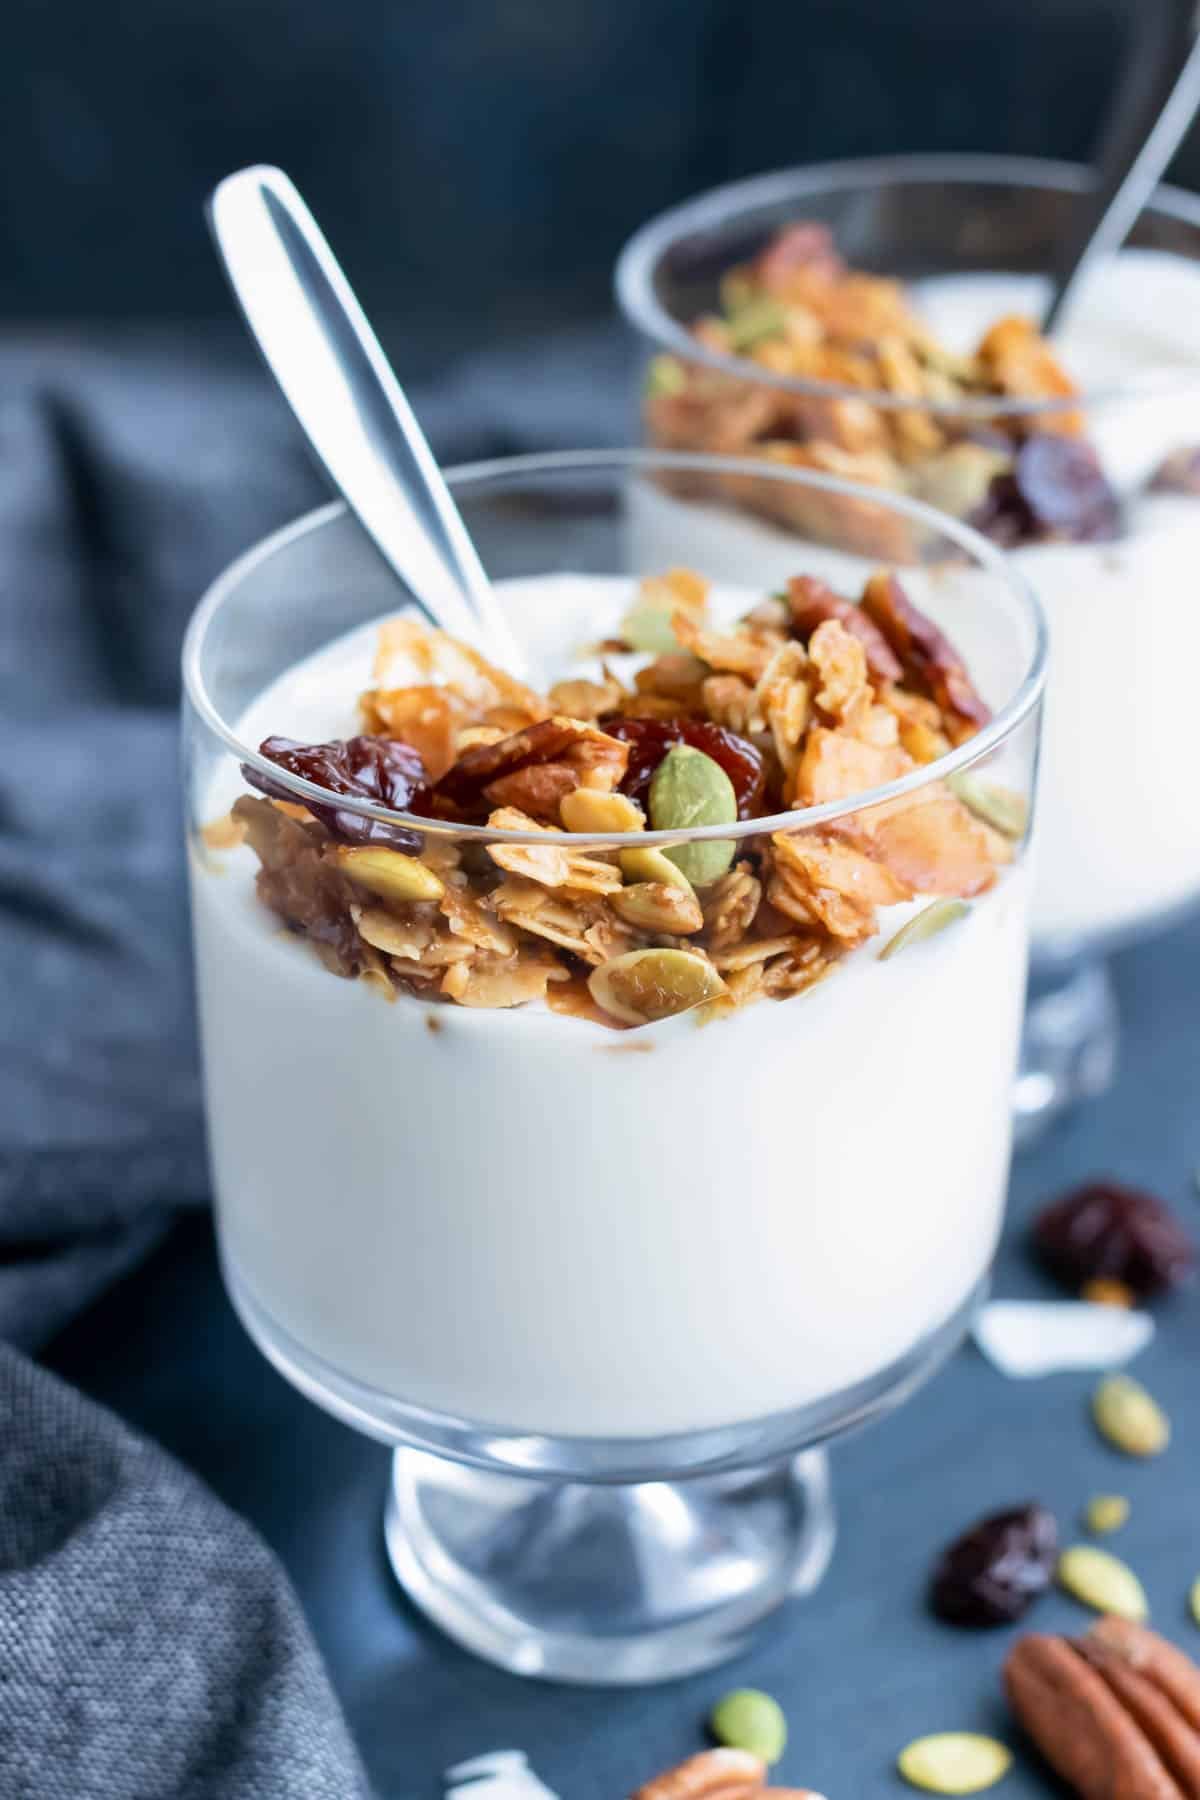 Yogurt in a glass with healthy granola on top for an easy breakfast recipe idea.